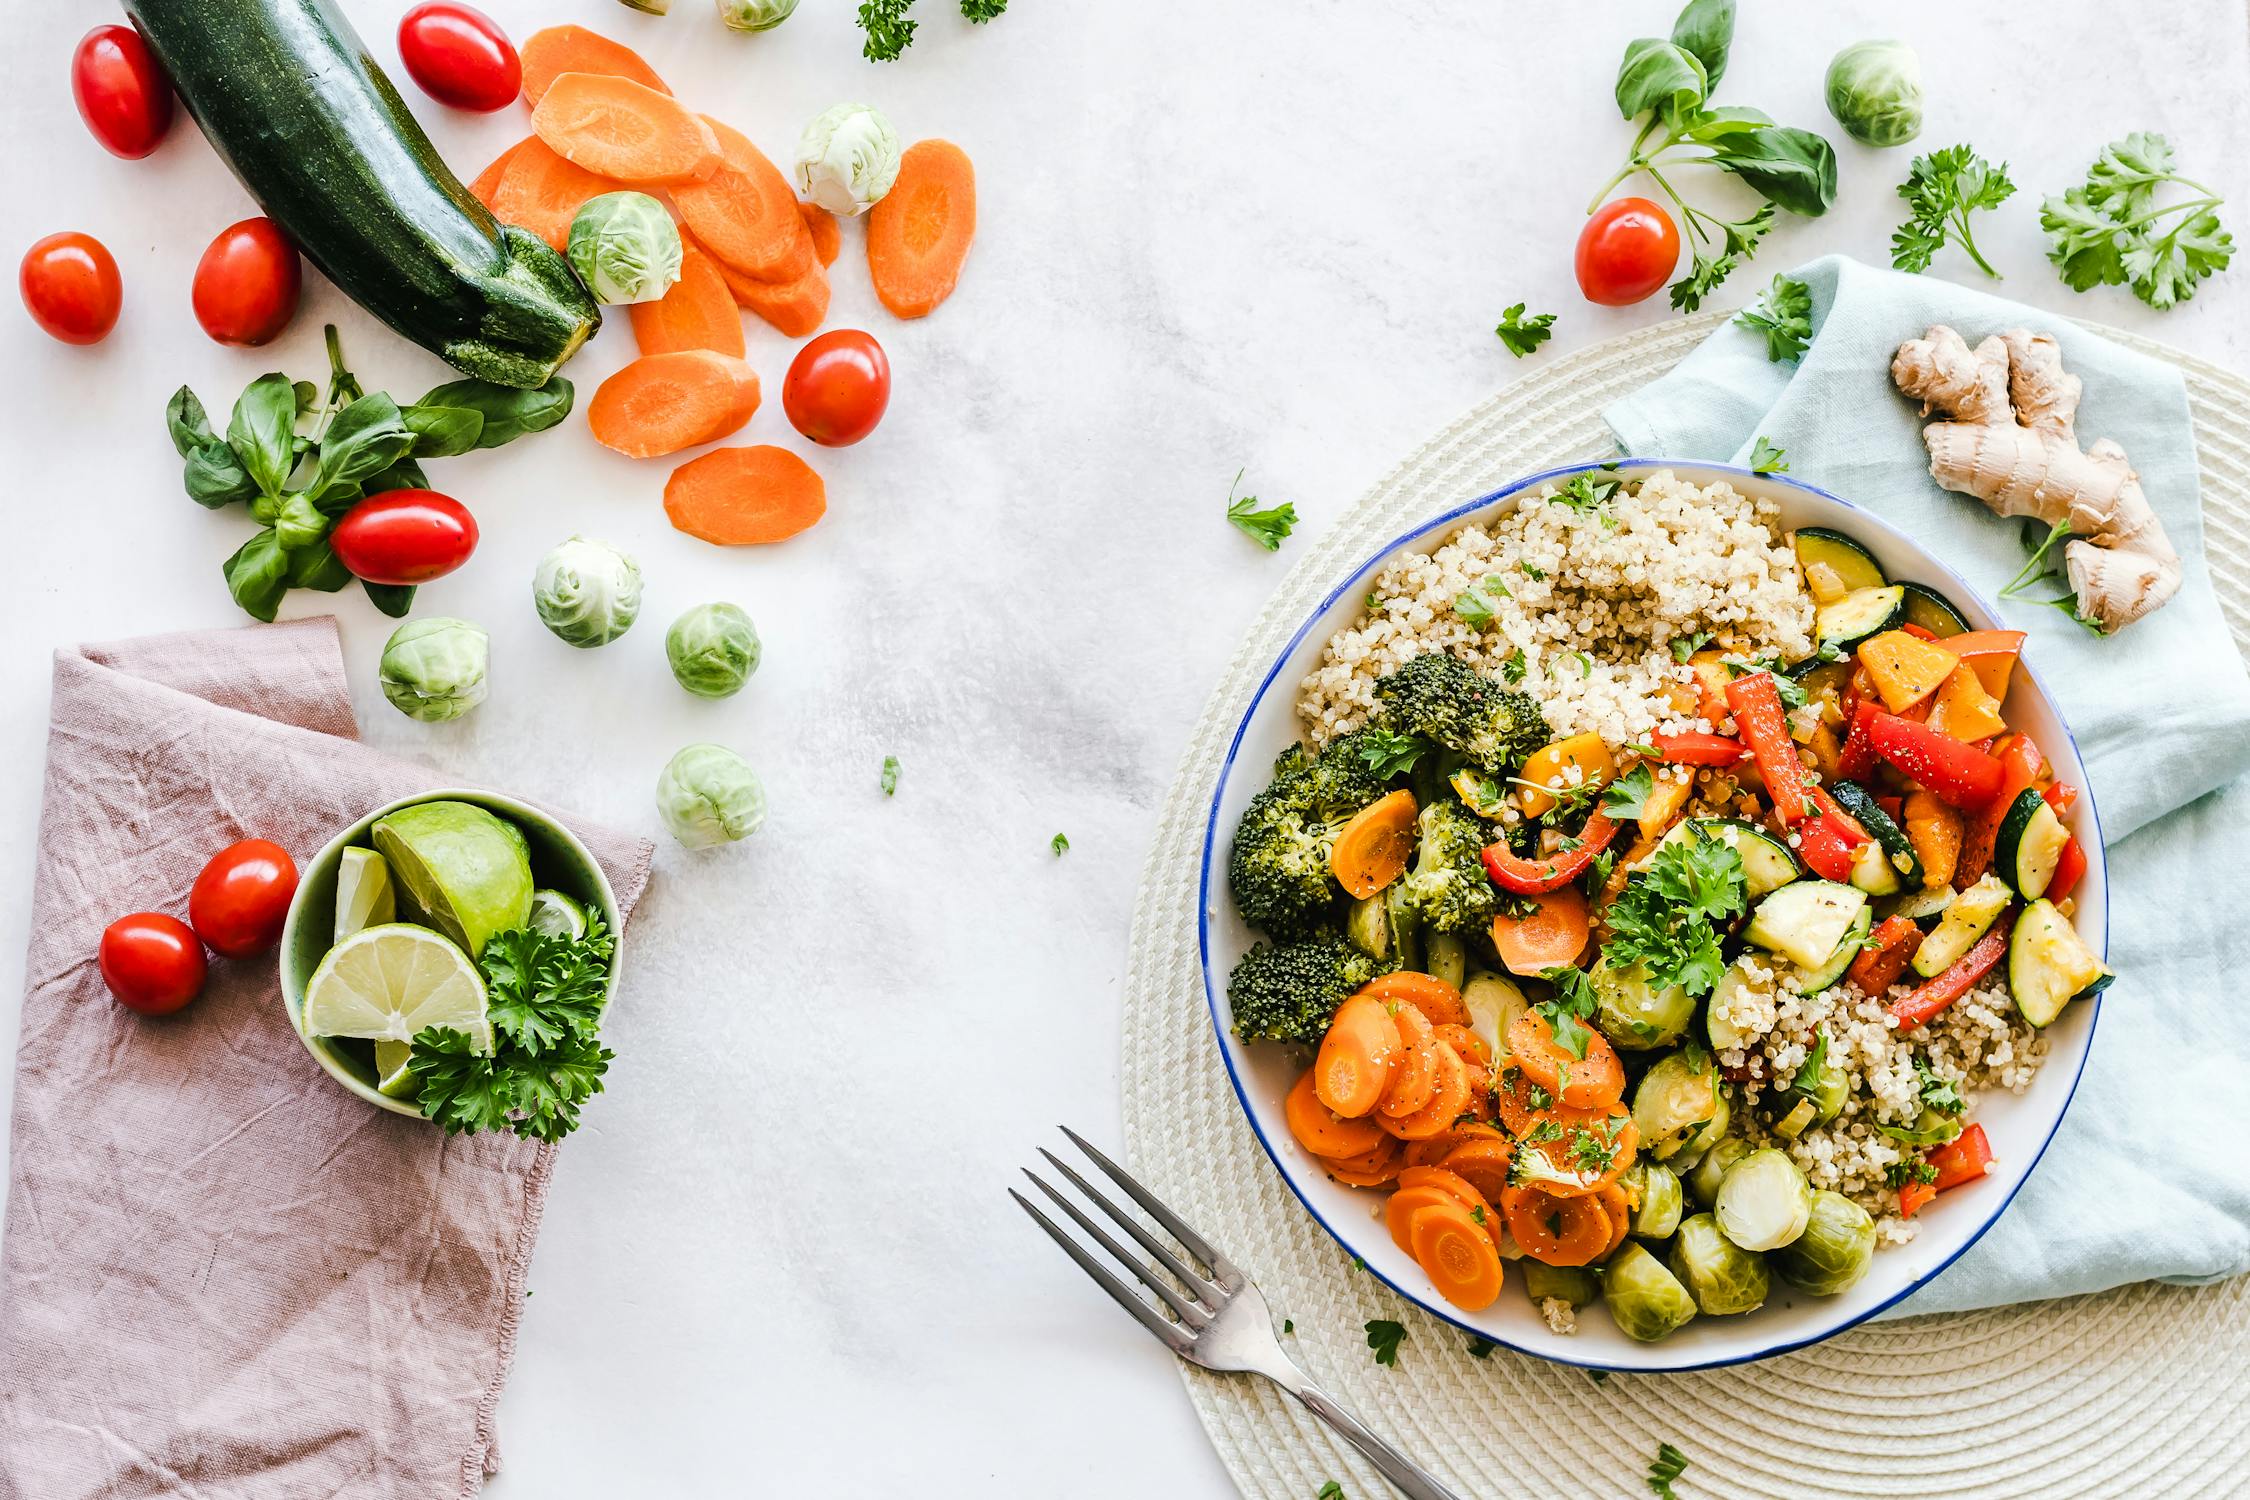 A birds eye view of a table with a white table cloth and various veggies and grain dishes. Photo by pexels user Ella Olsson. Photo used courtesy of Pexels.com.